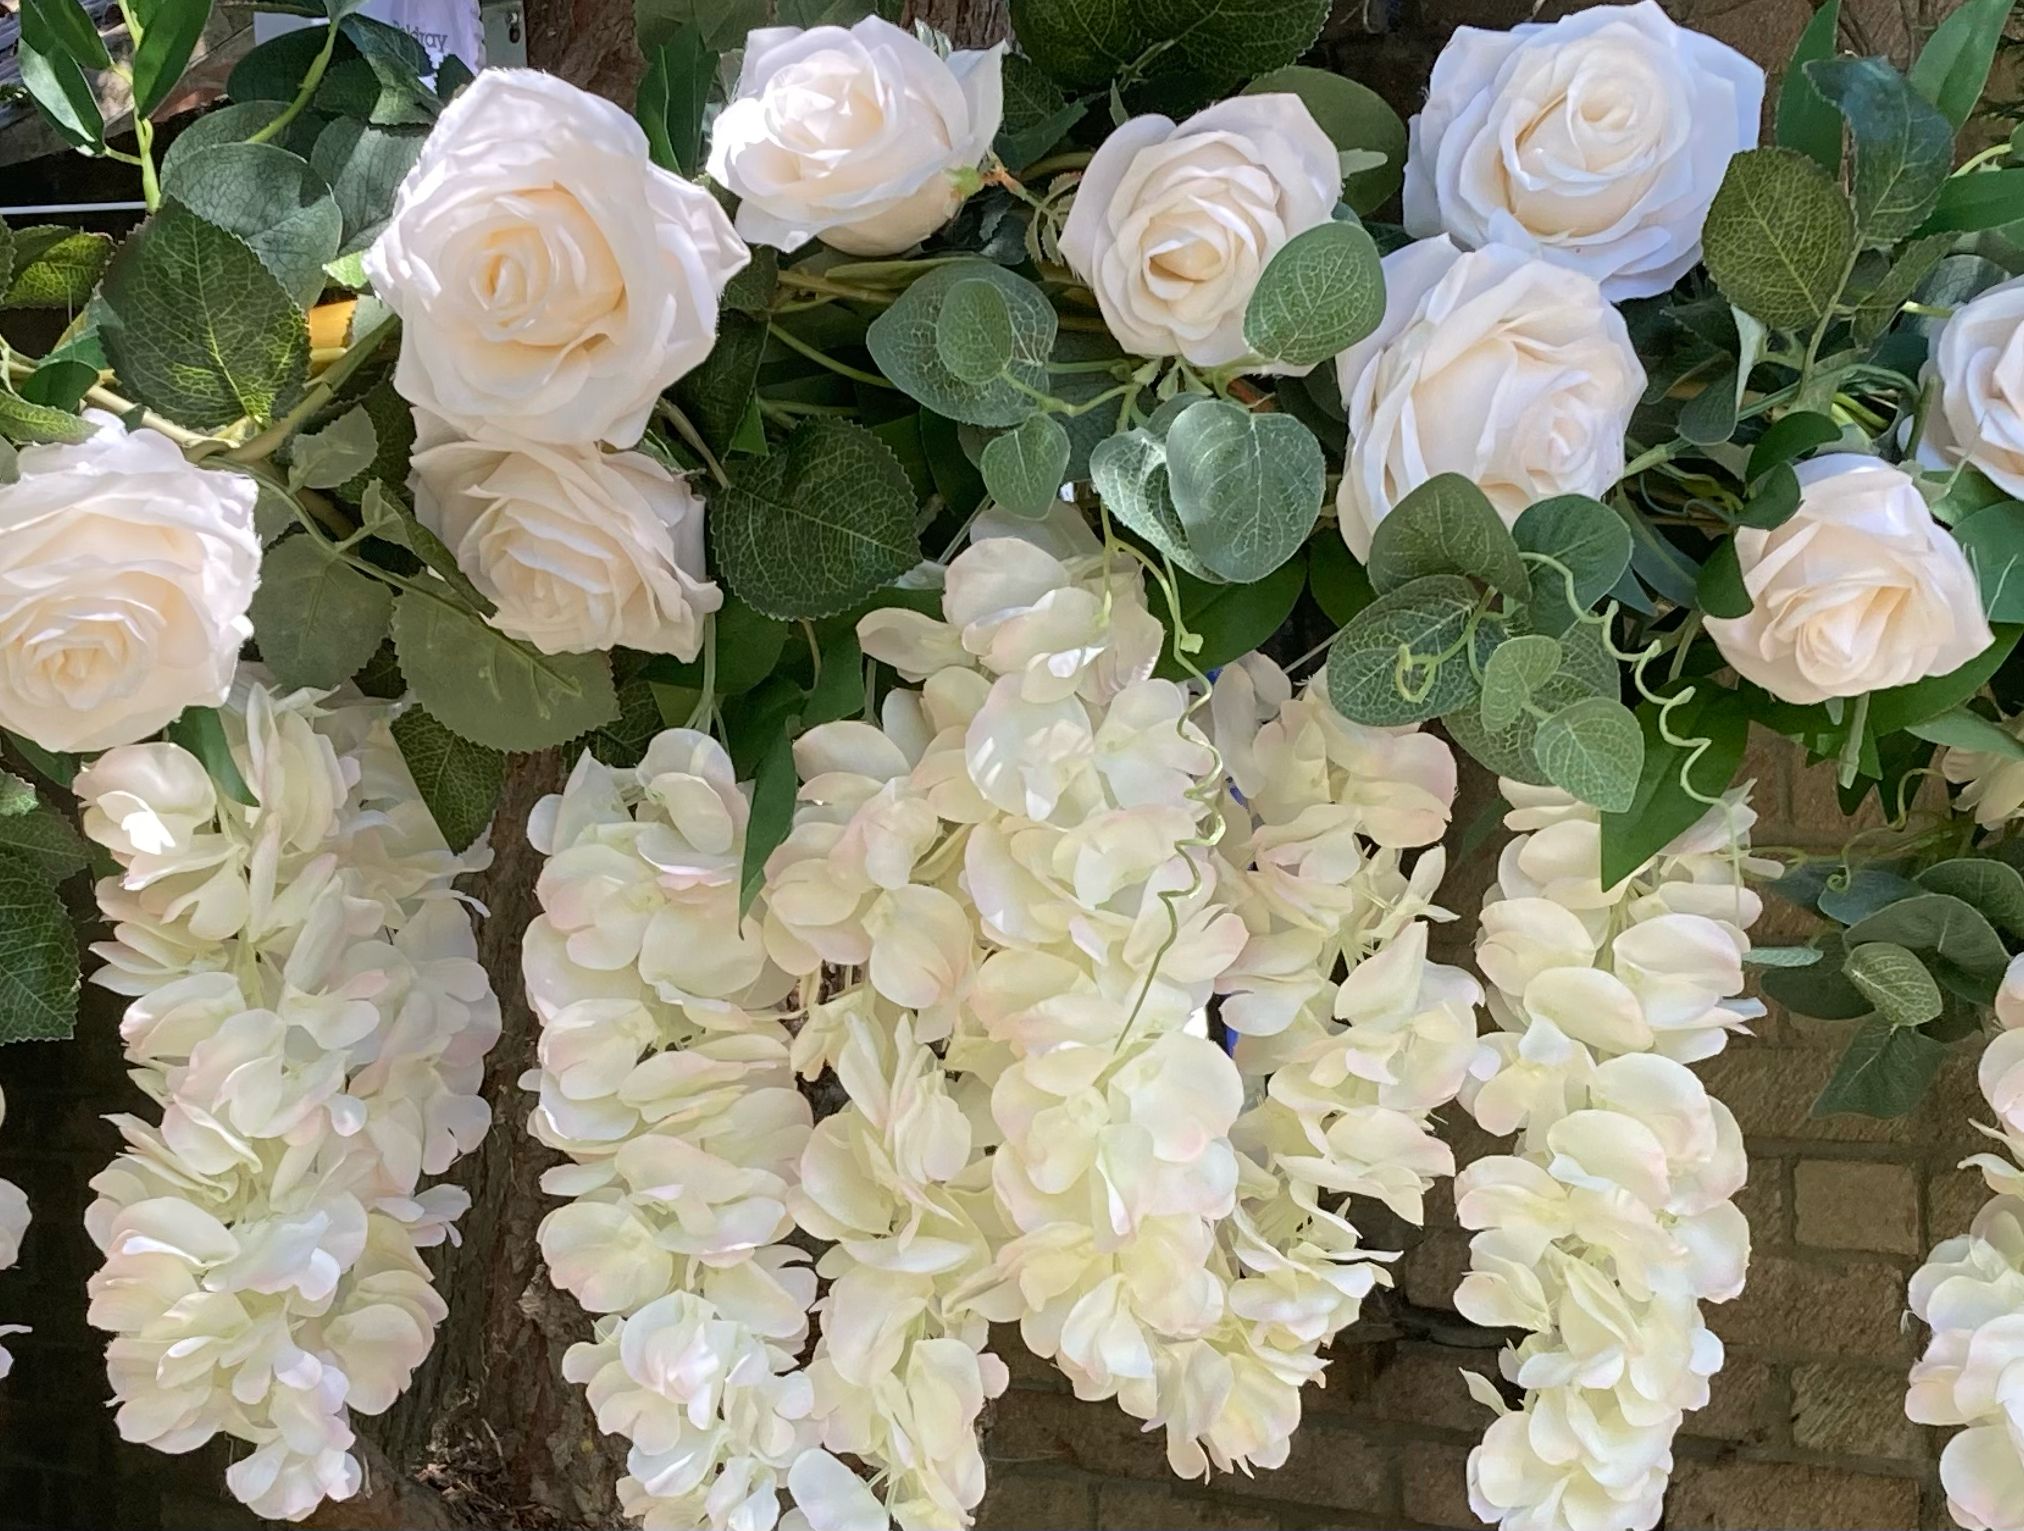 White roses and flower garlands